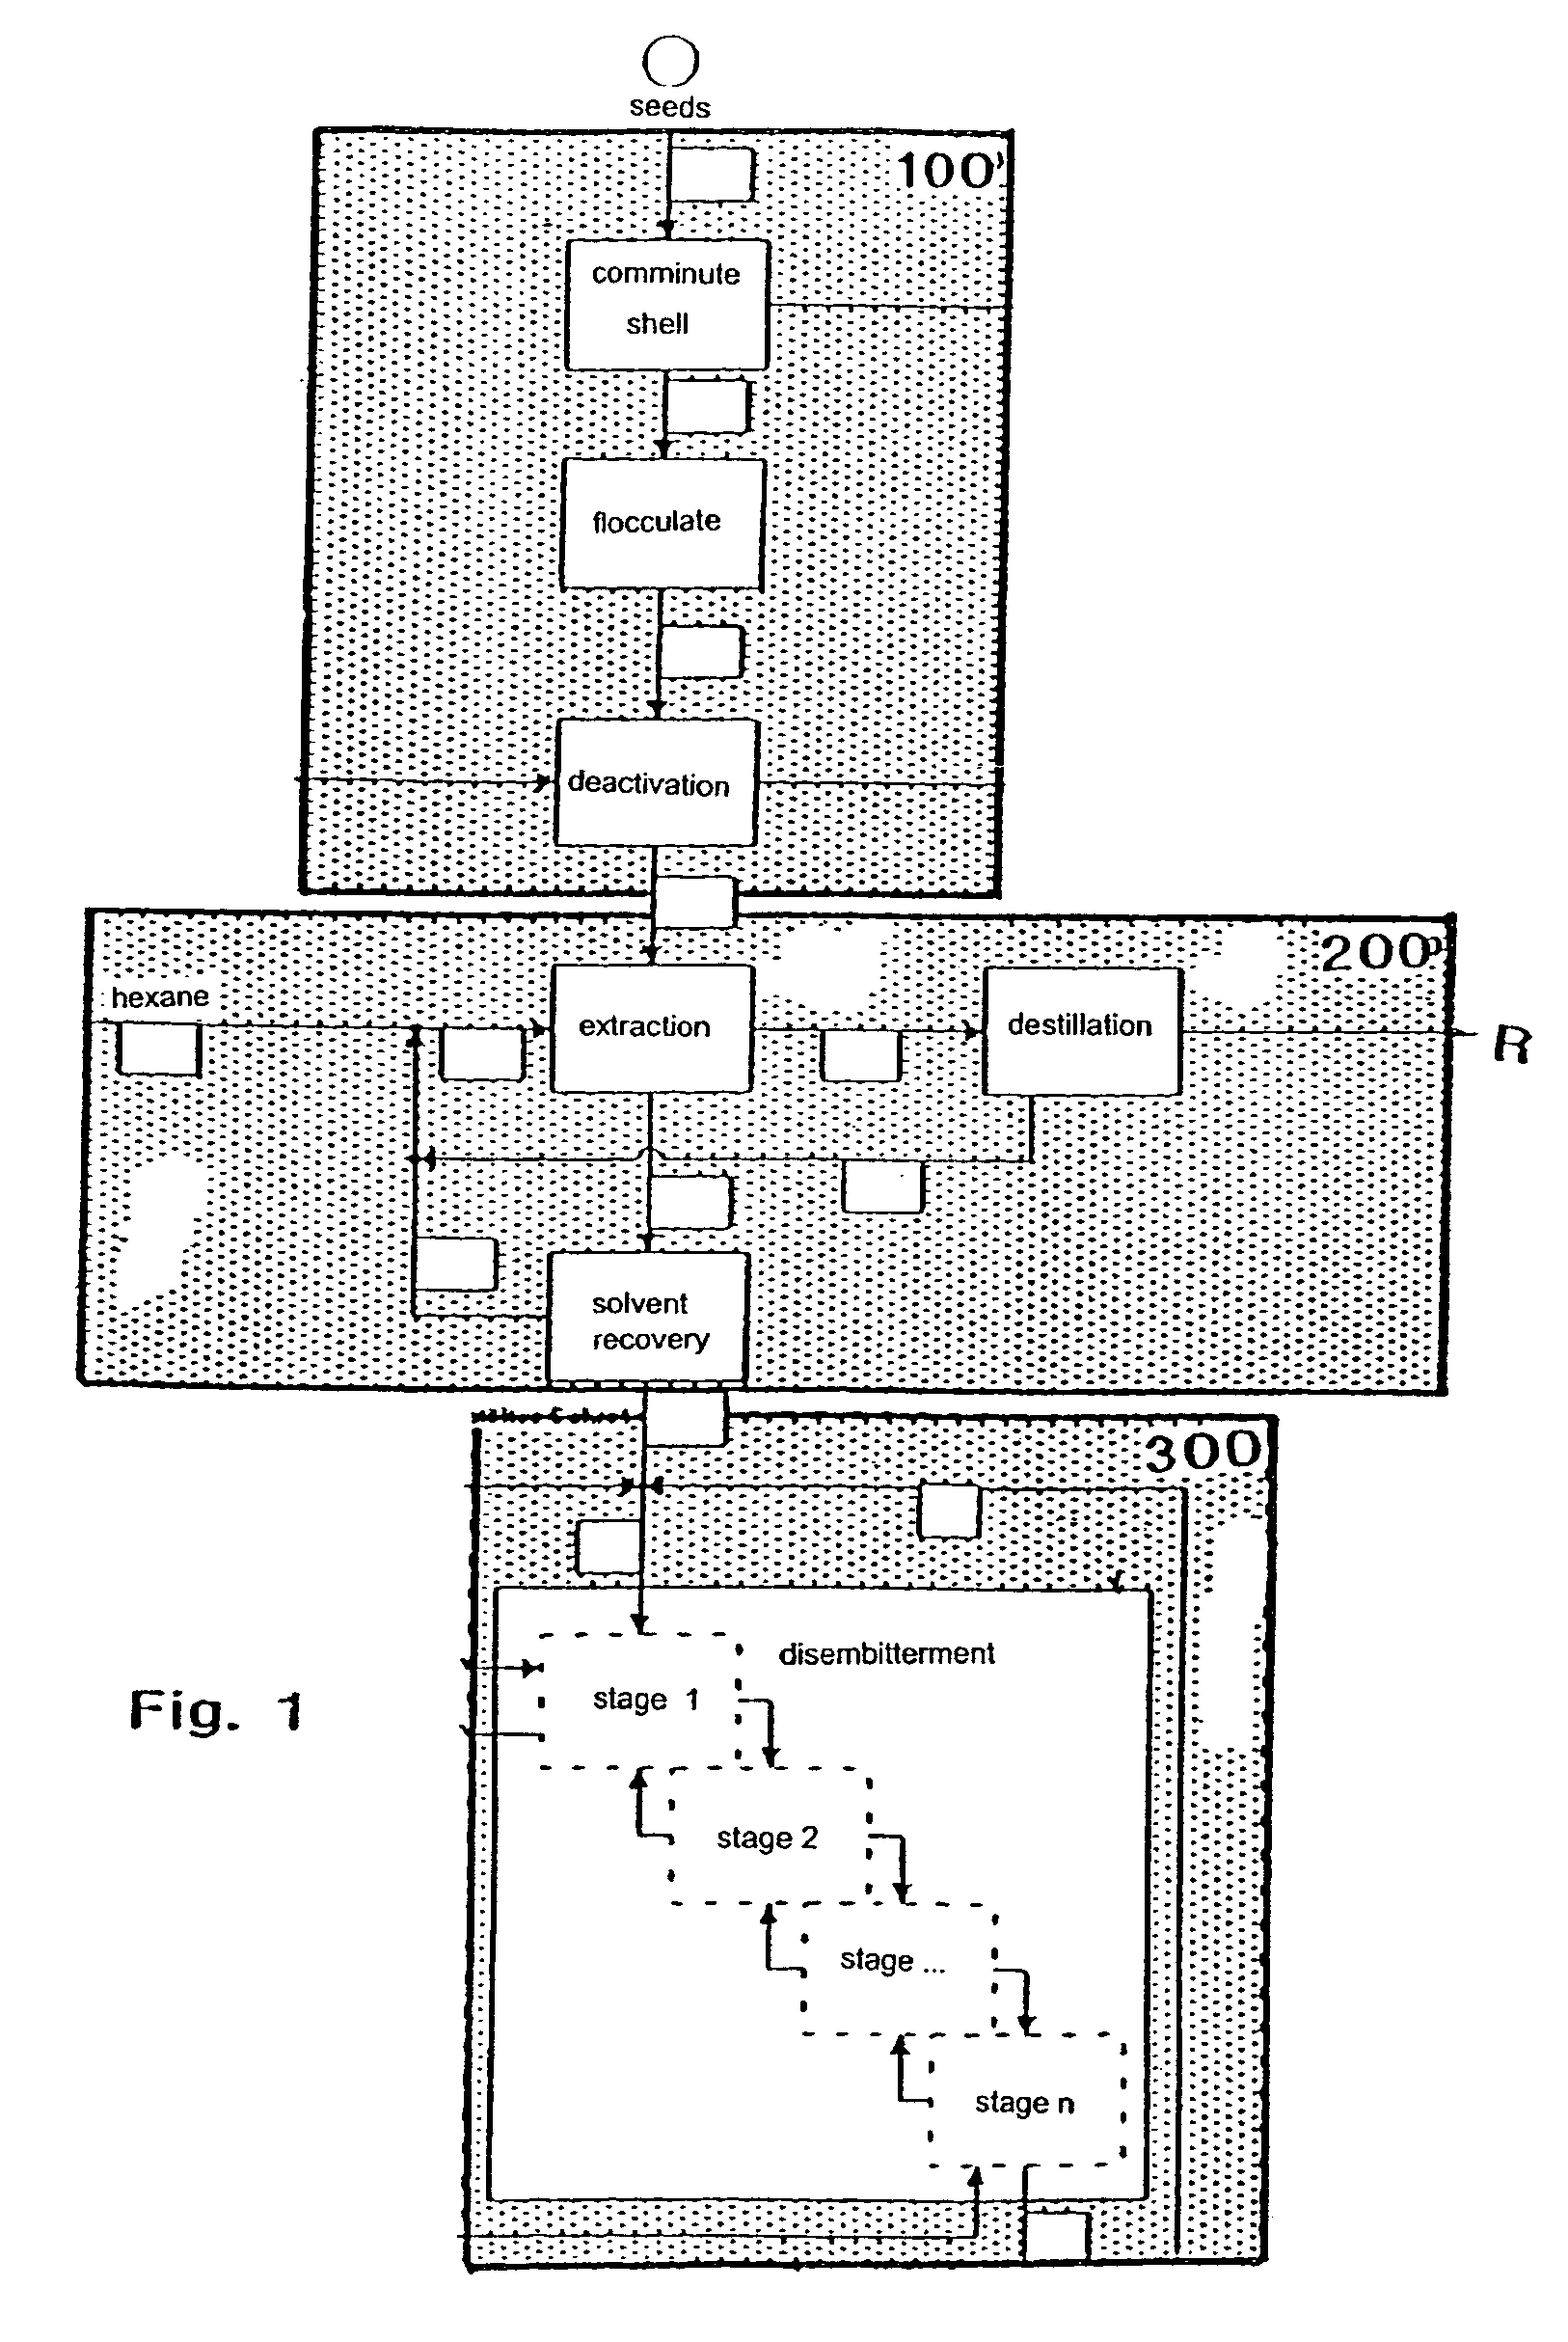 Method for treating and processing lupine seeds containing alkaloid, oil and protein